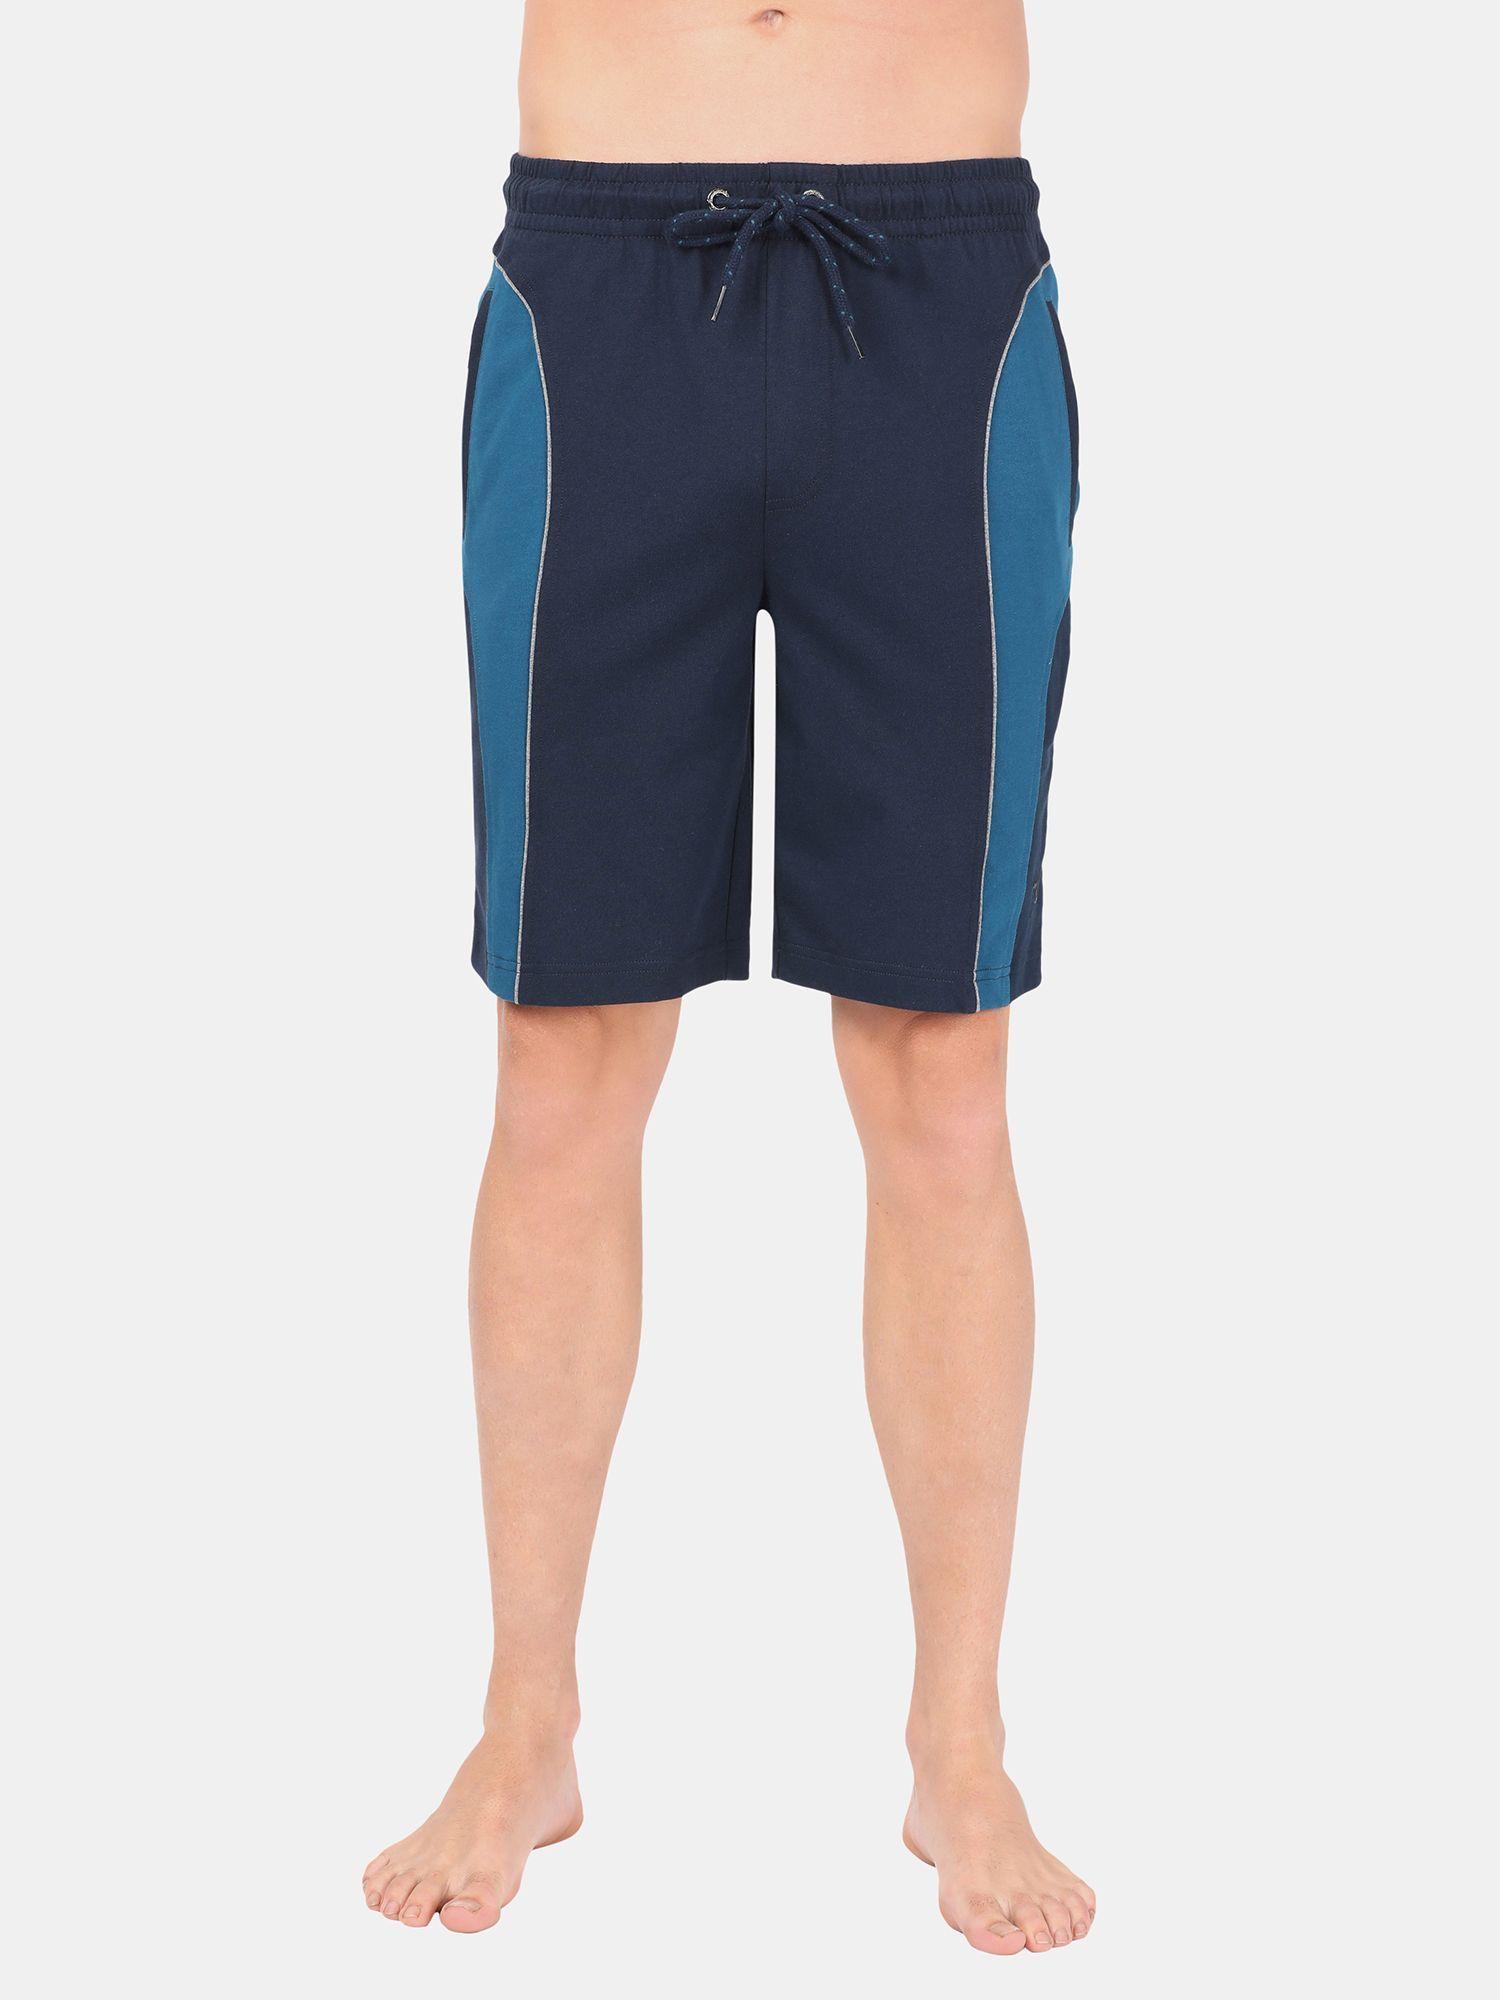 9411-mens-super-combed-cotton-rich-straight-fit-solid-shorts-navy-&-steller-blue